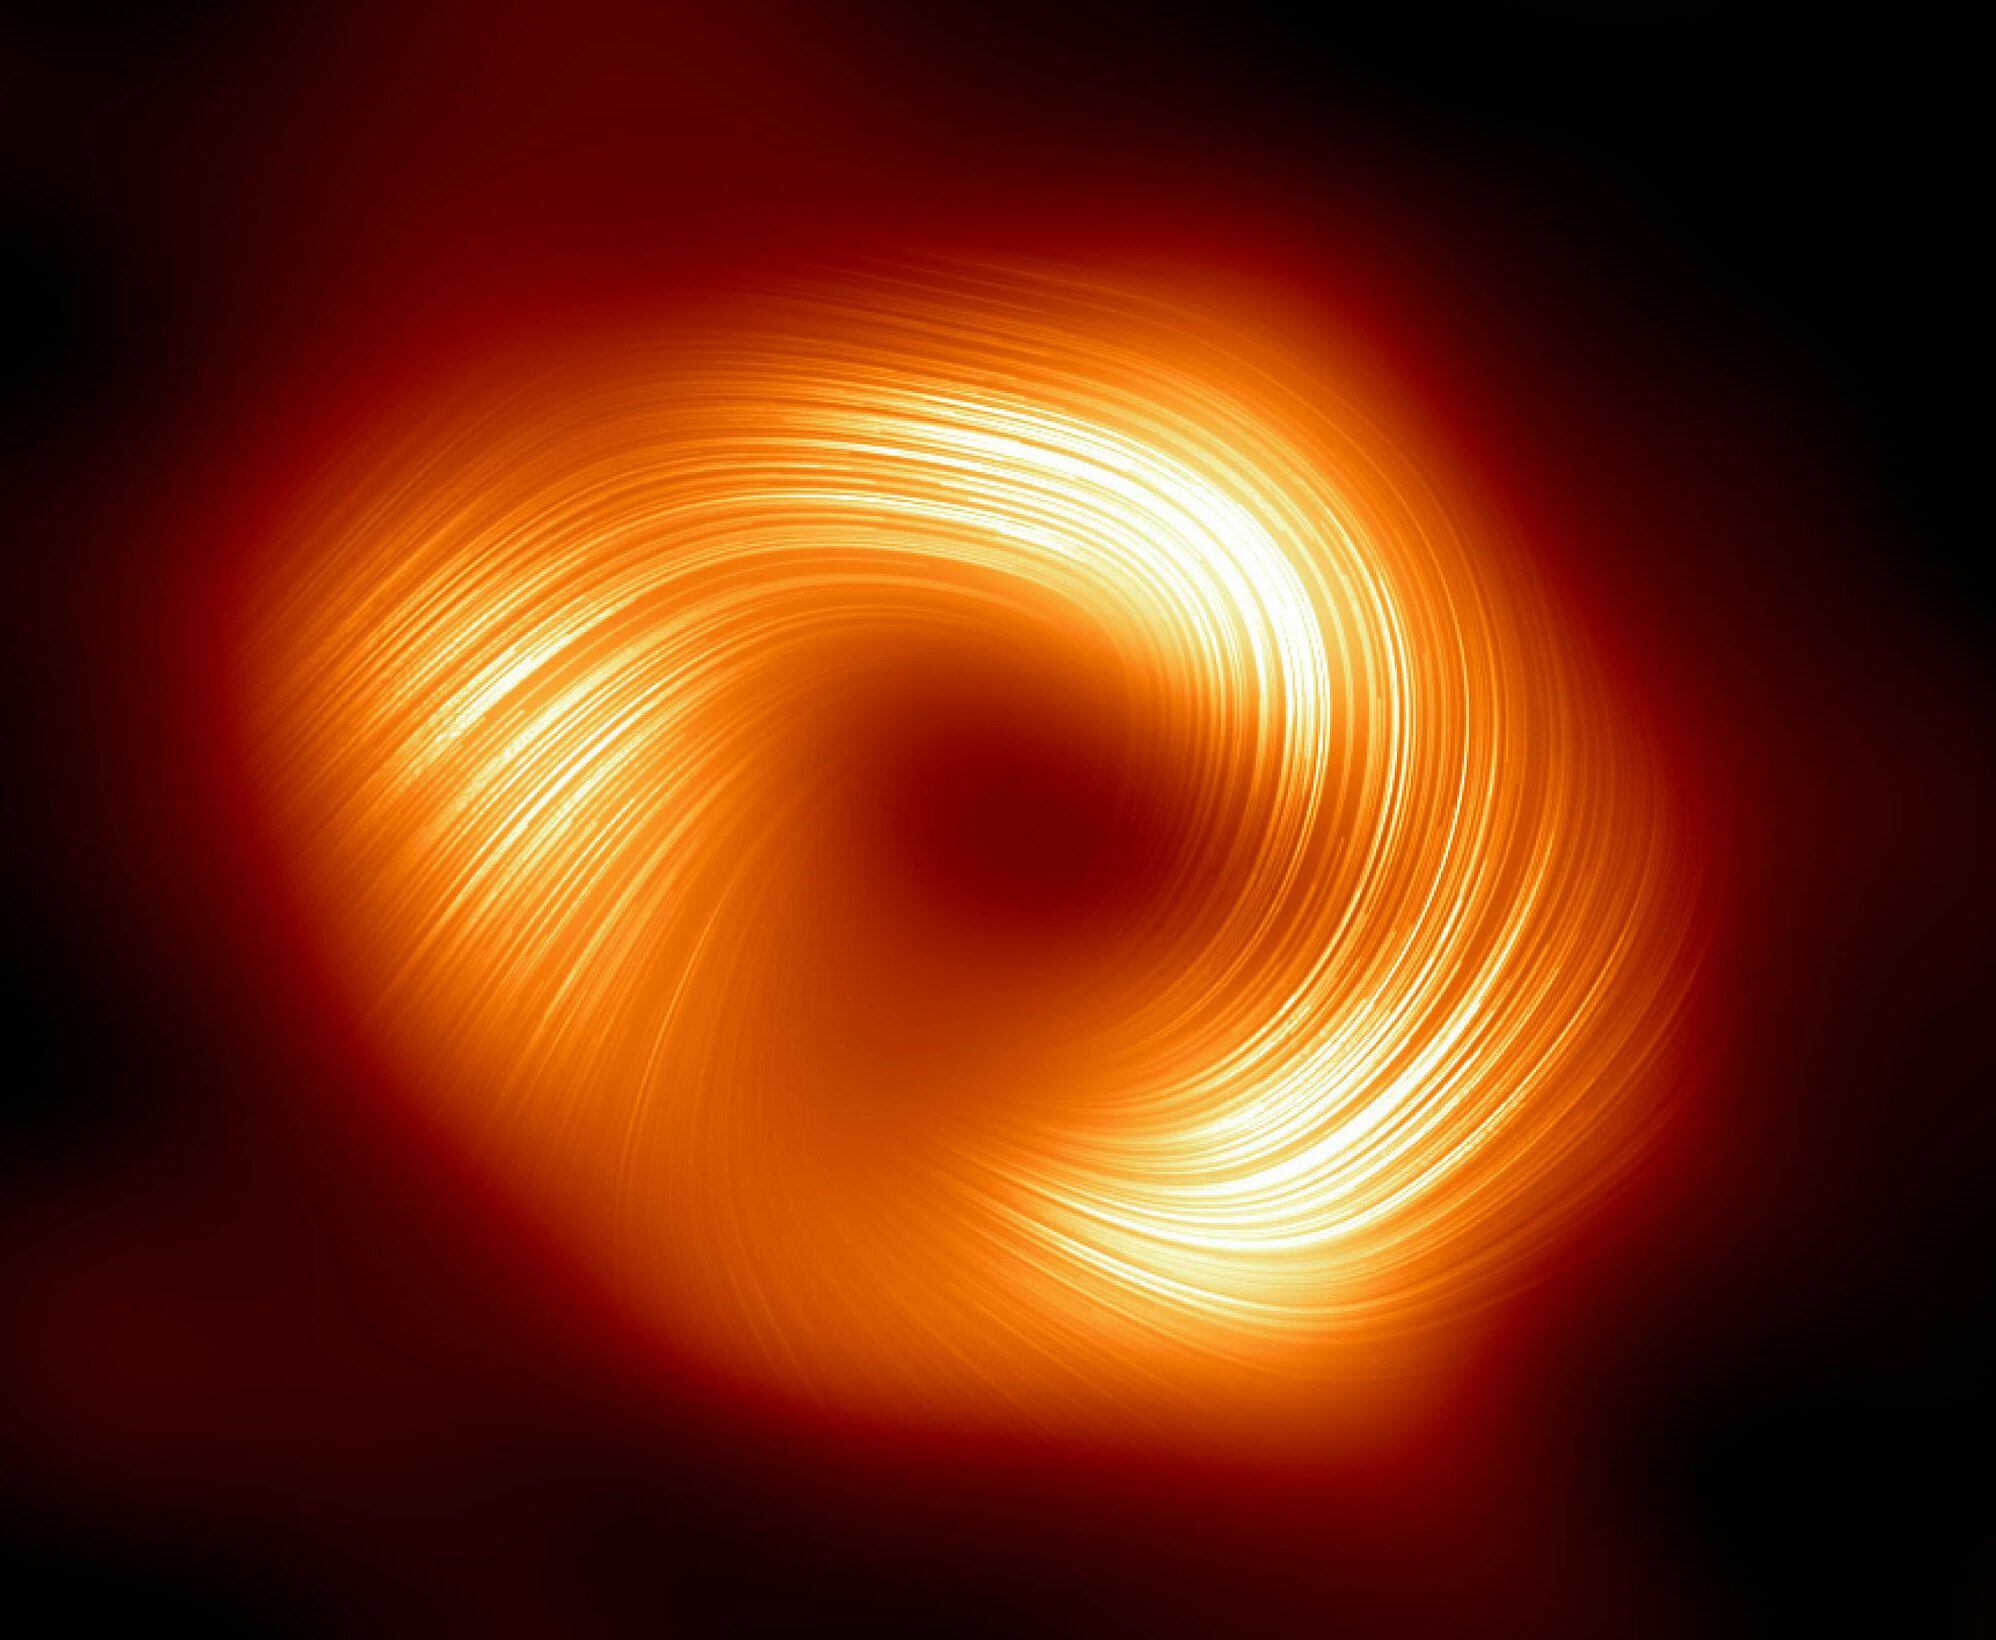 For the first time, we're seeing the Sagittarius A* black hole in polarized light. The Event Horizon Telescope collaboration says the image offers a new look at 